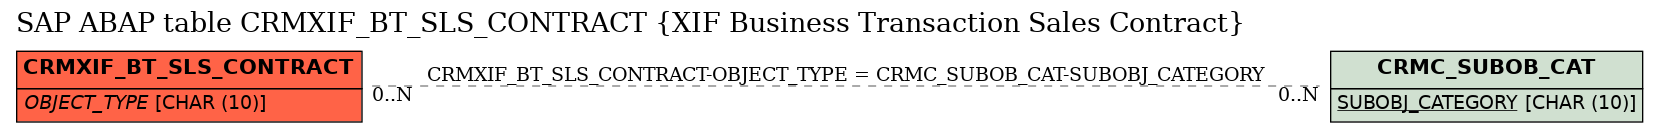 E-R Diagram for table CRMXIF_BT_SLS_CONTRACT (XIF Business Transaction Sales Contract)